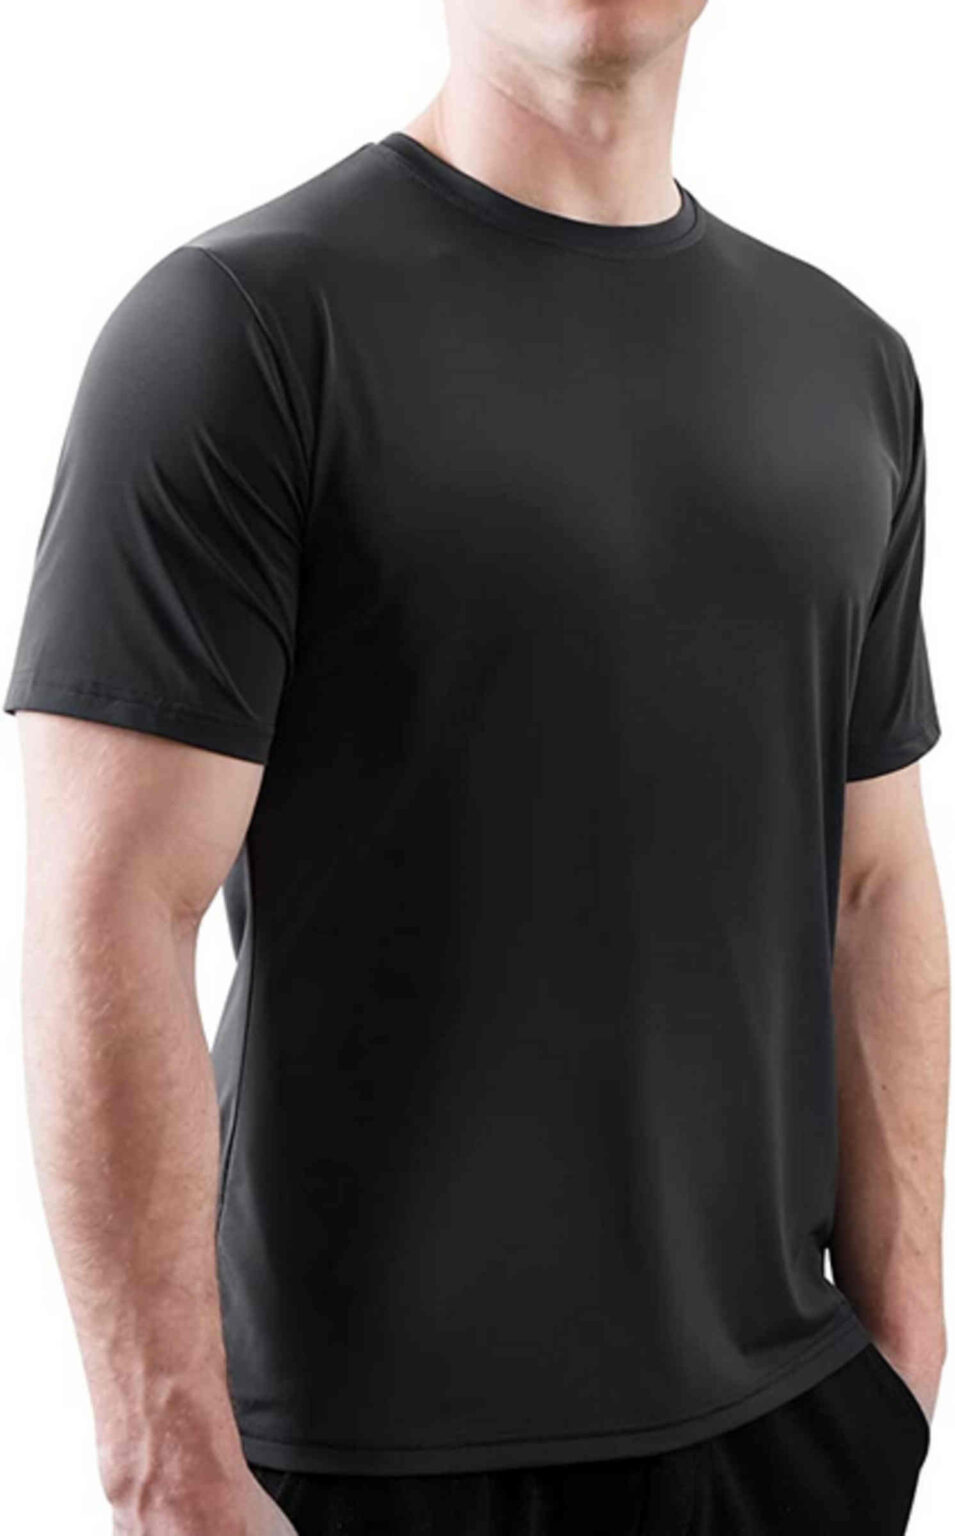 Don't let the heat mess up your summer style! Use the discount code 10%OFF WQH4IOCO to buy Elegear men's cooling shirt for a cooler experience.